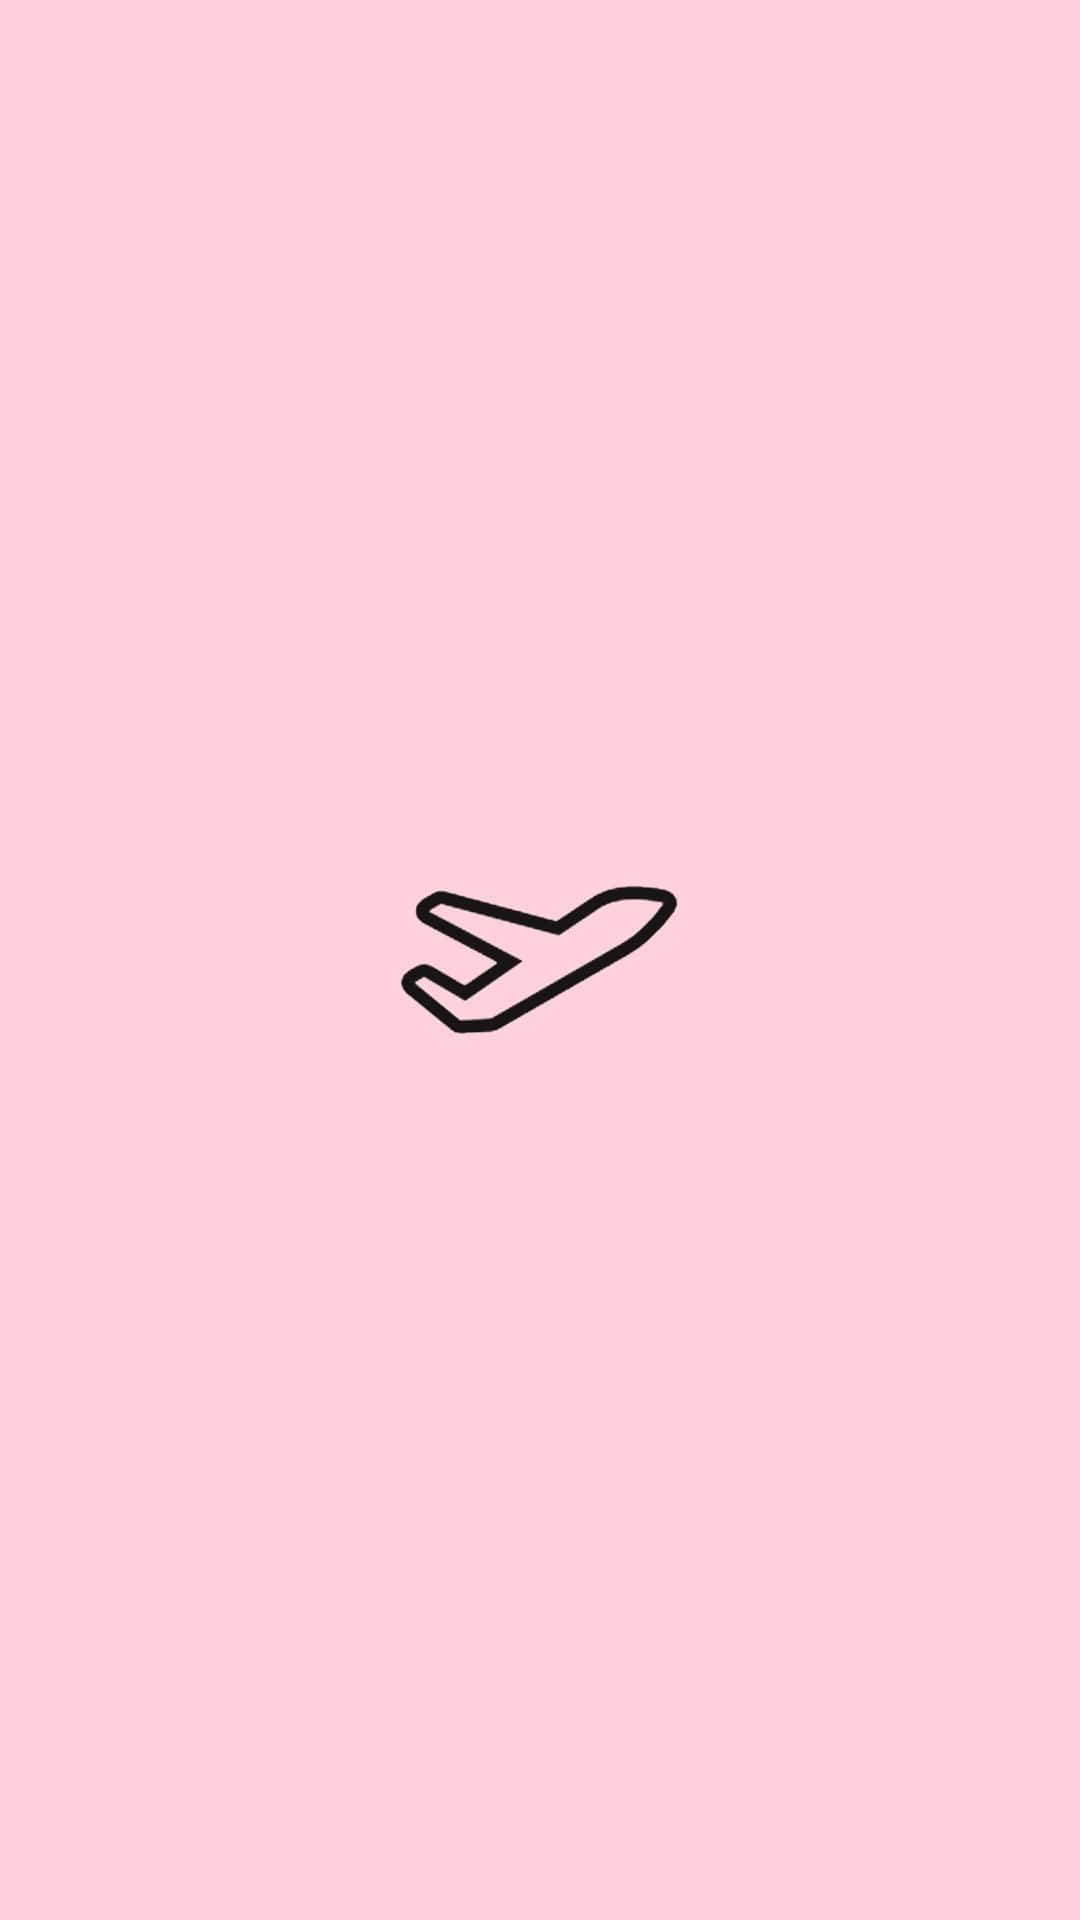 A Plane On A Pink Background